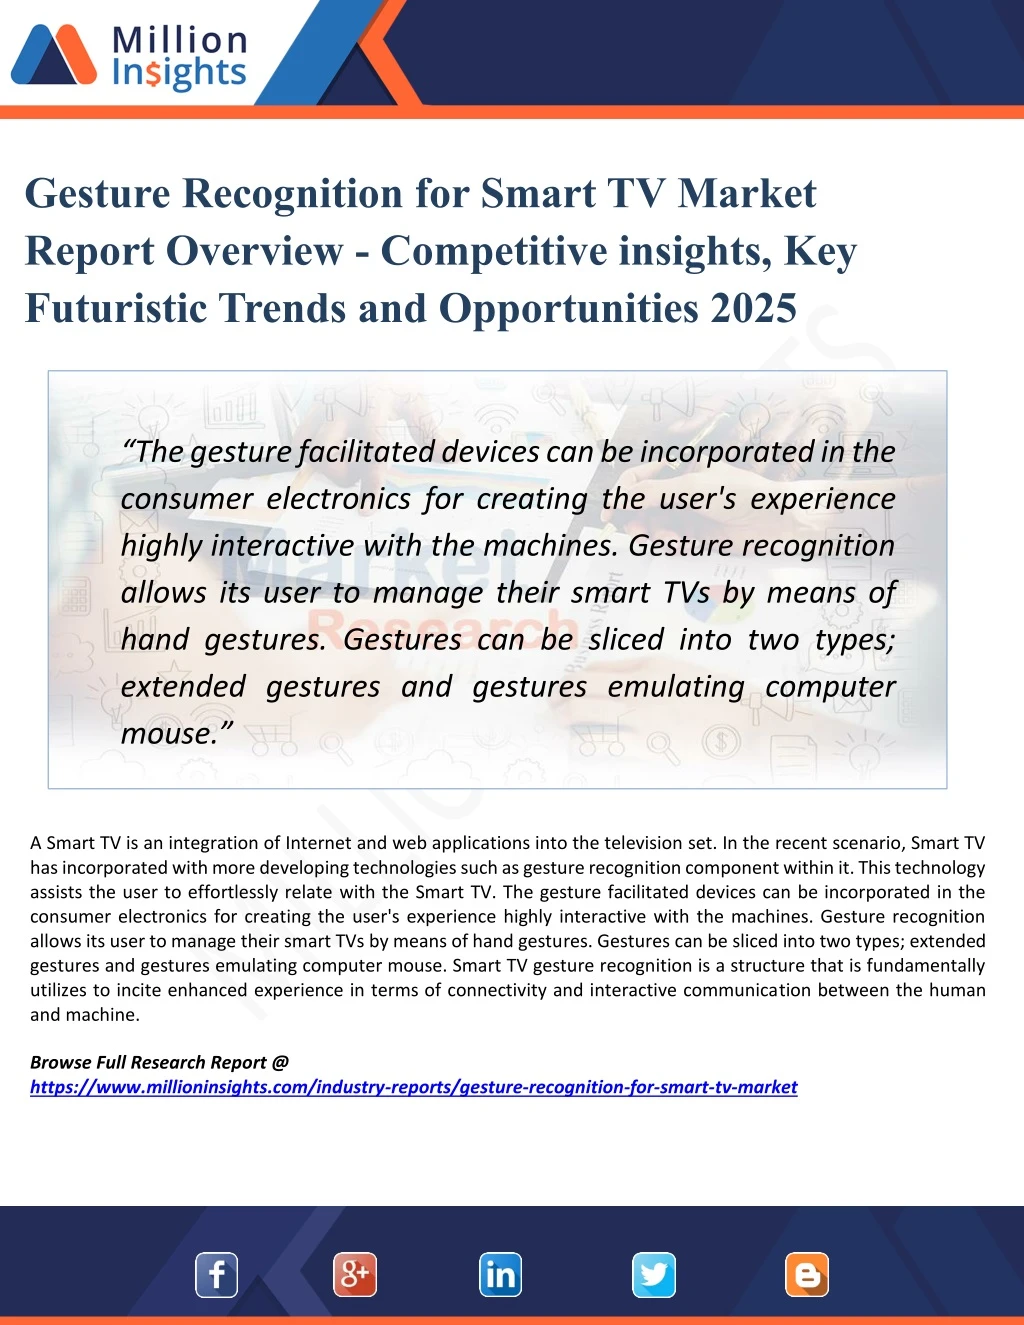 PPT Gesture Recognition for Smart TV Market Overview with detailed